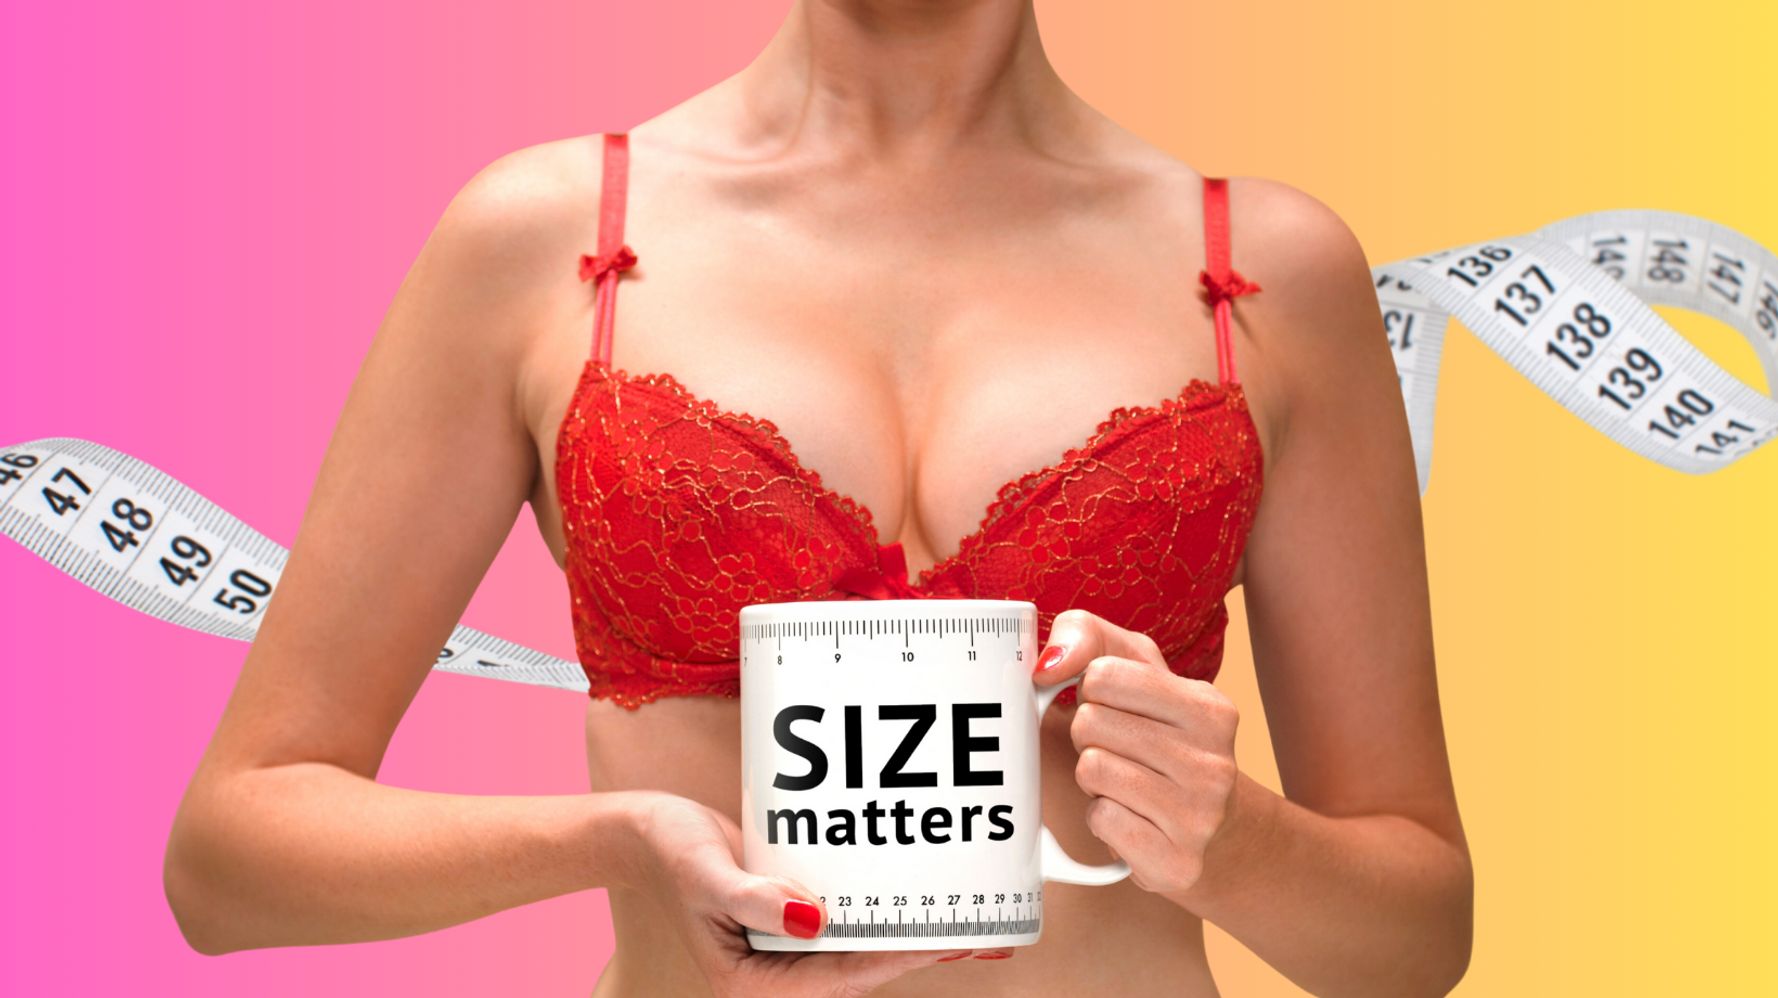 Video: How To Measure Your Bra Size - Big Cup Little Cup